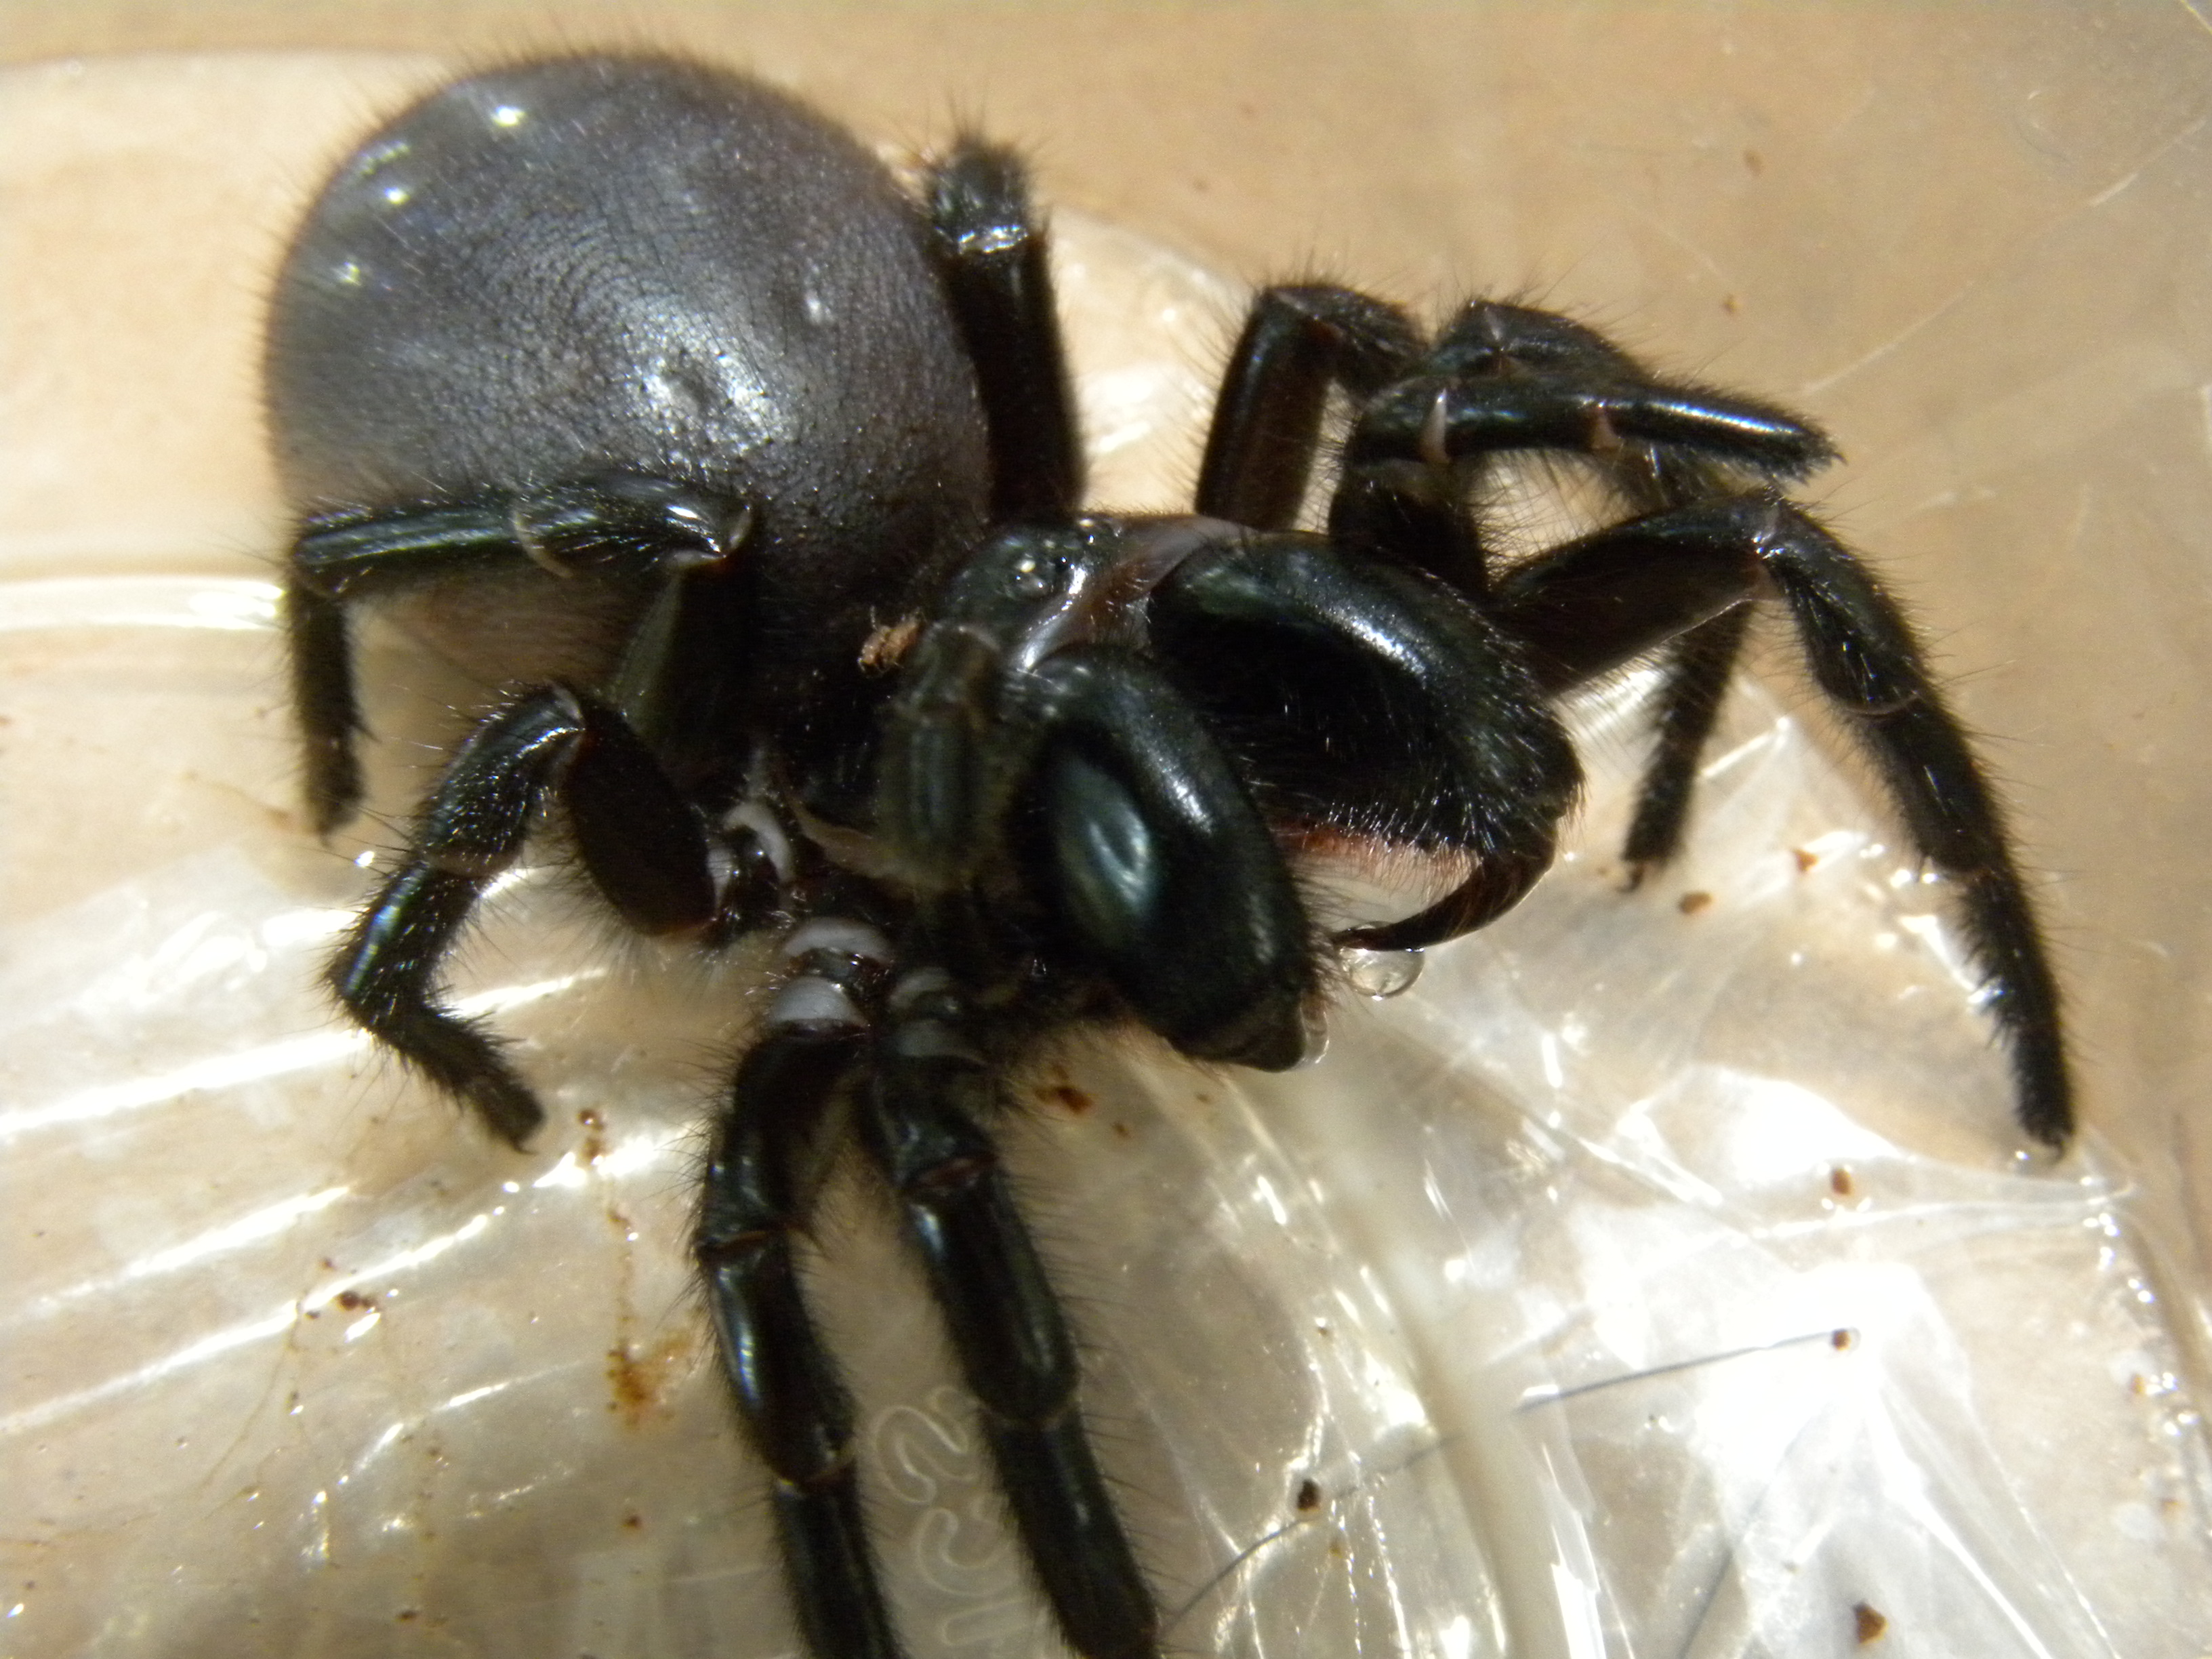 The New South Wales, particularly in forests and urban areas. Sydney-Funnel Web Spiders have been found in backyards and swimming pools and can be quiet aggressive when threatened.